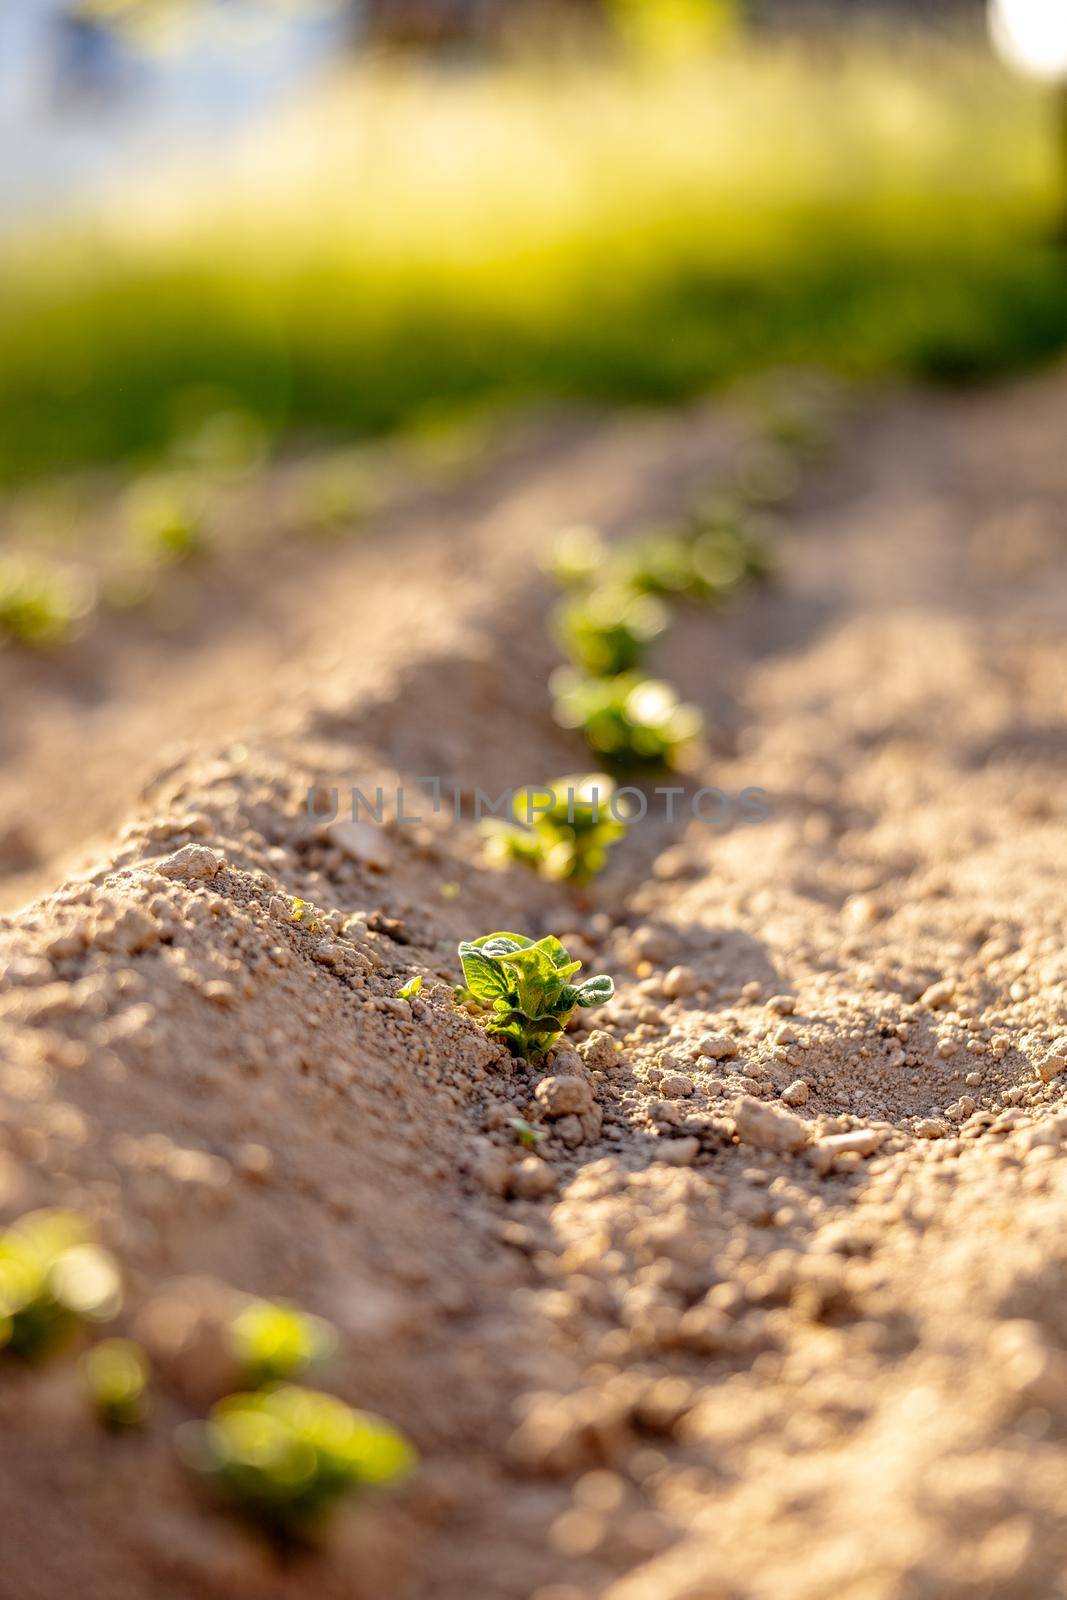 Seedlings growing up from fertile soil in the farmer's garden, morning sun shines. Ecology and ecological balance, farming and planting. Agricultural scene with sprouts in earth, close up. Soft focus